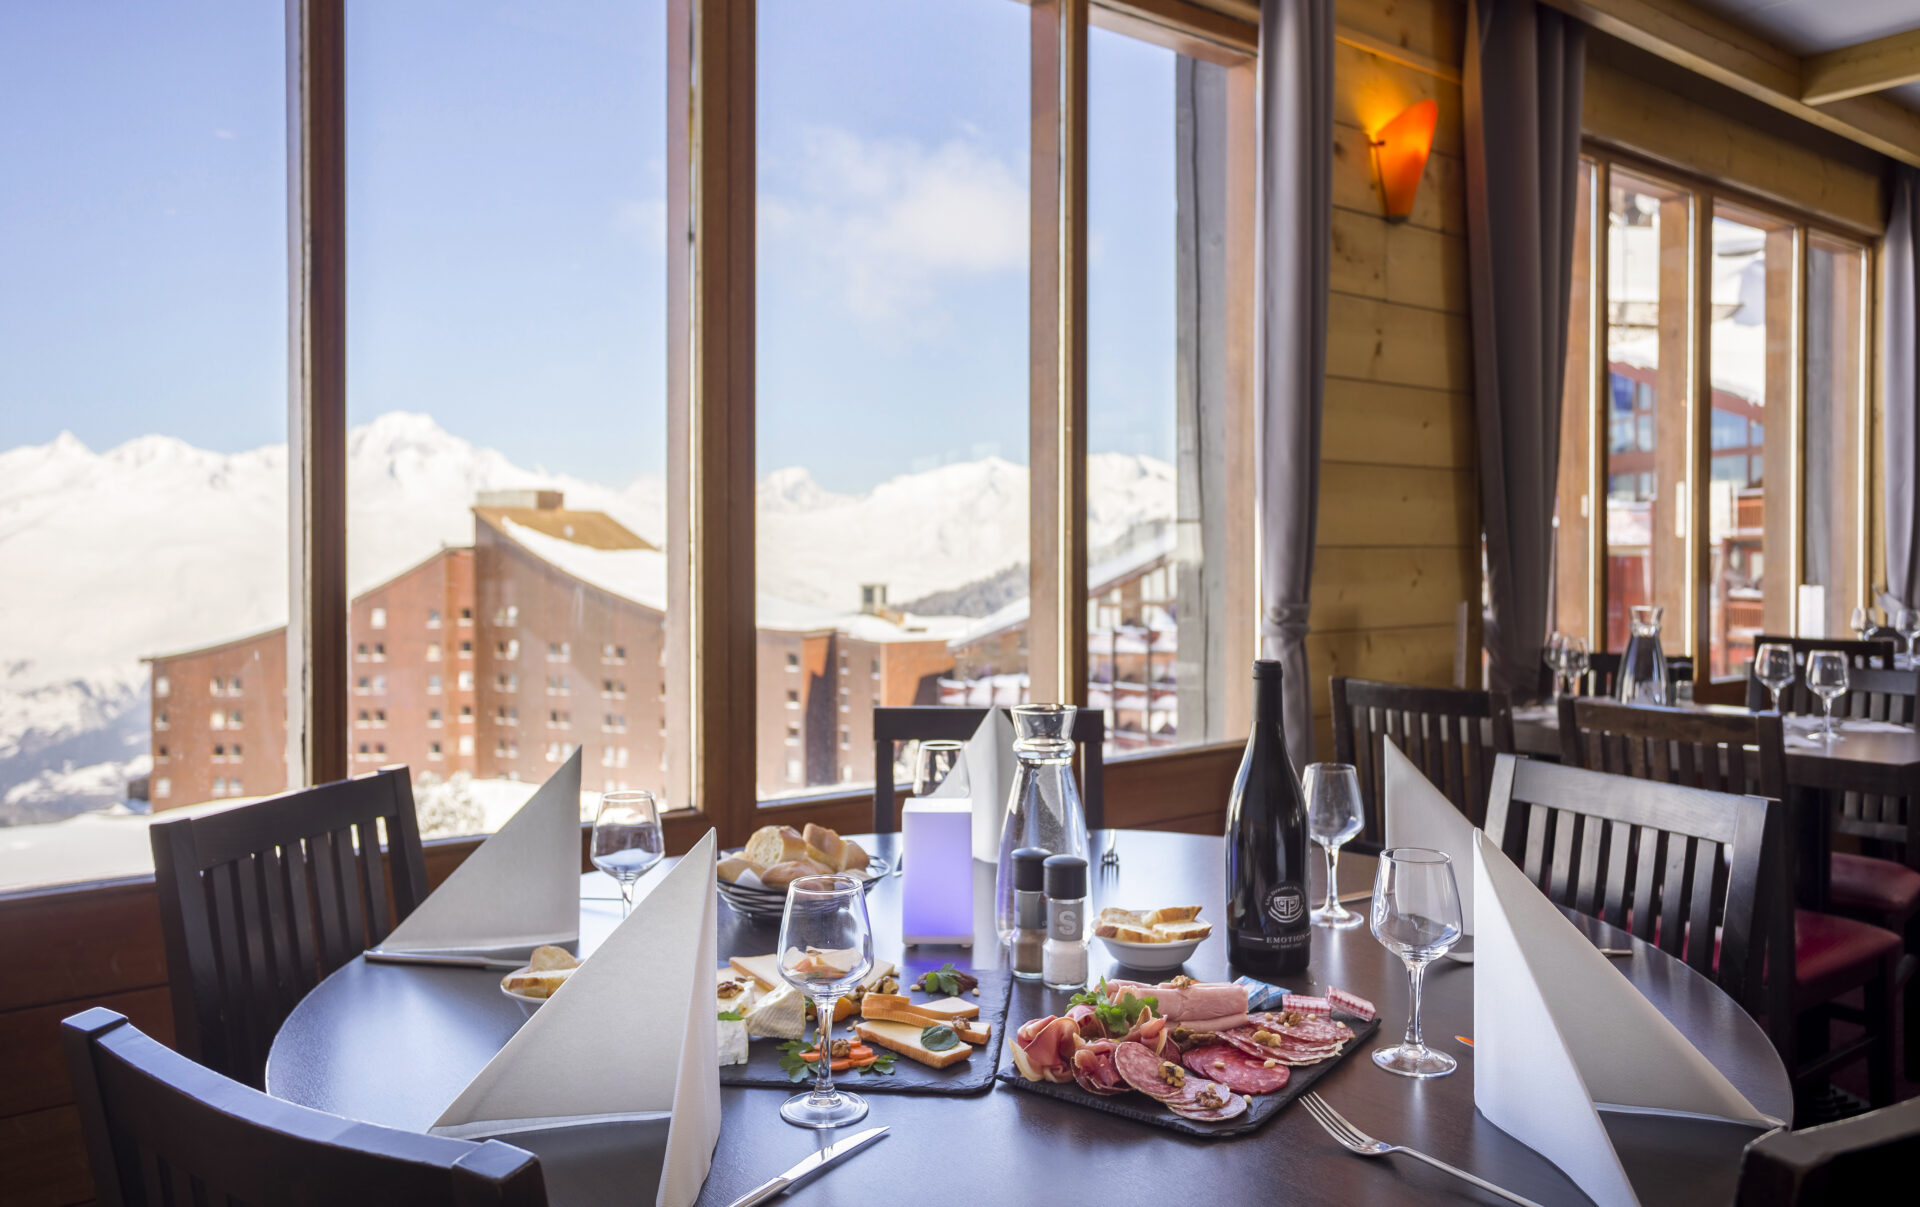 An image of a table at the restaurant overlooking the slopes